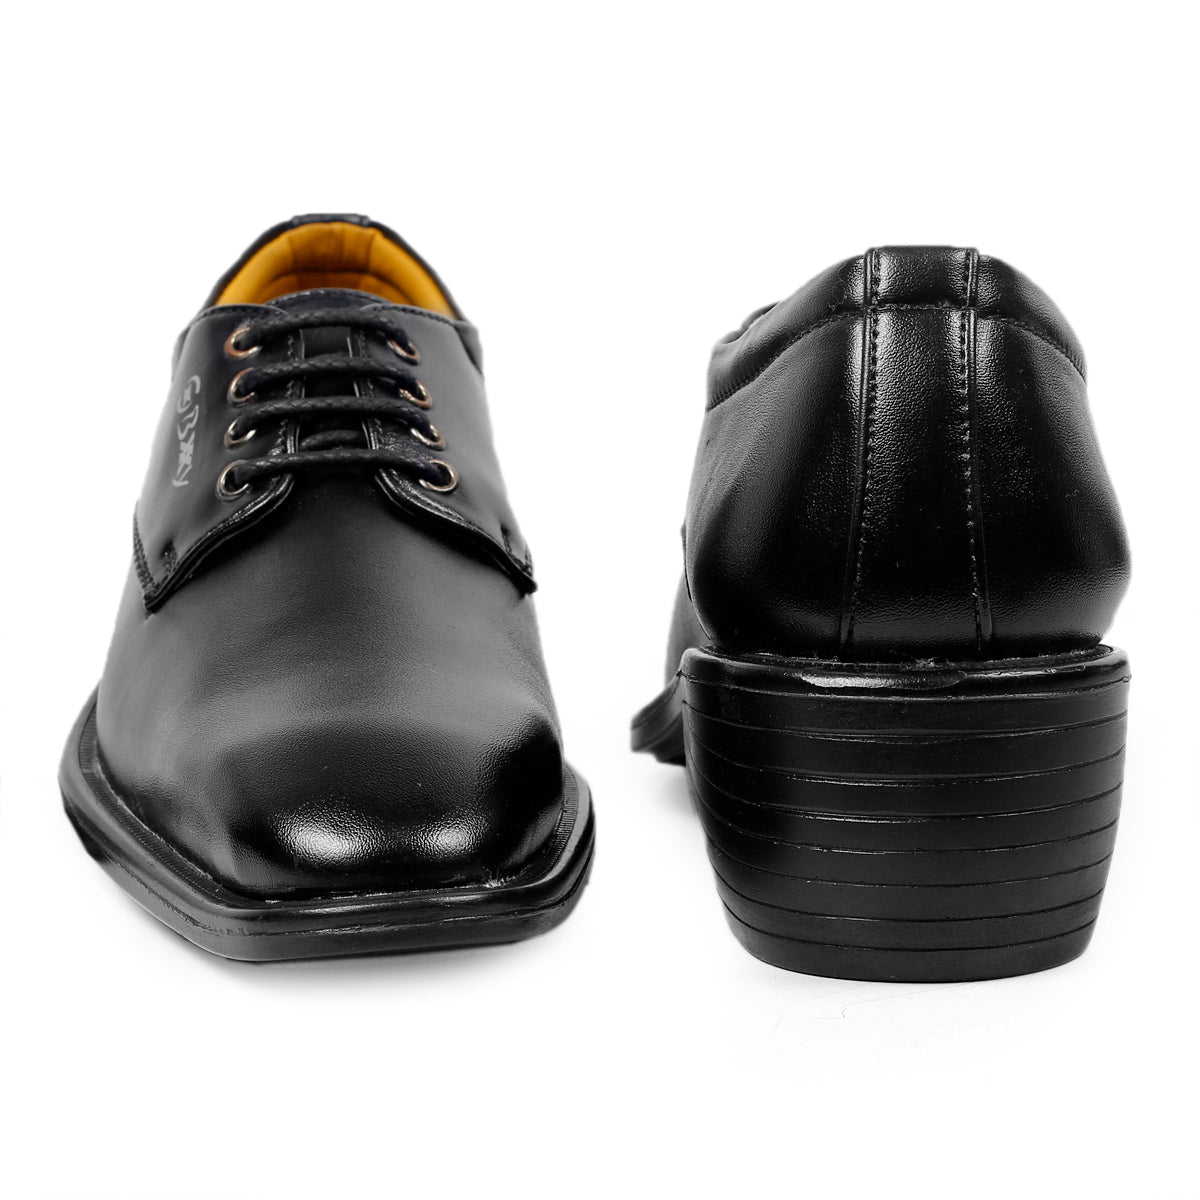 BXXY Office Wear Formal Lace-up Elevator Shoes